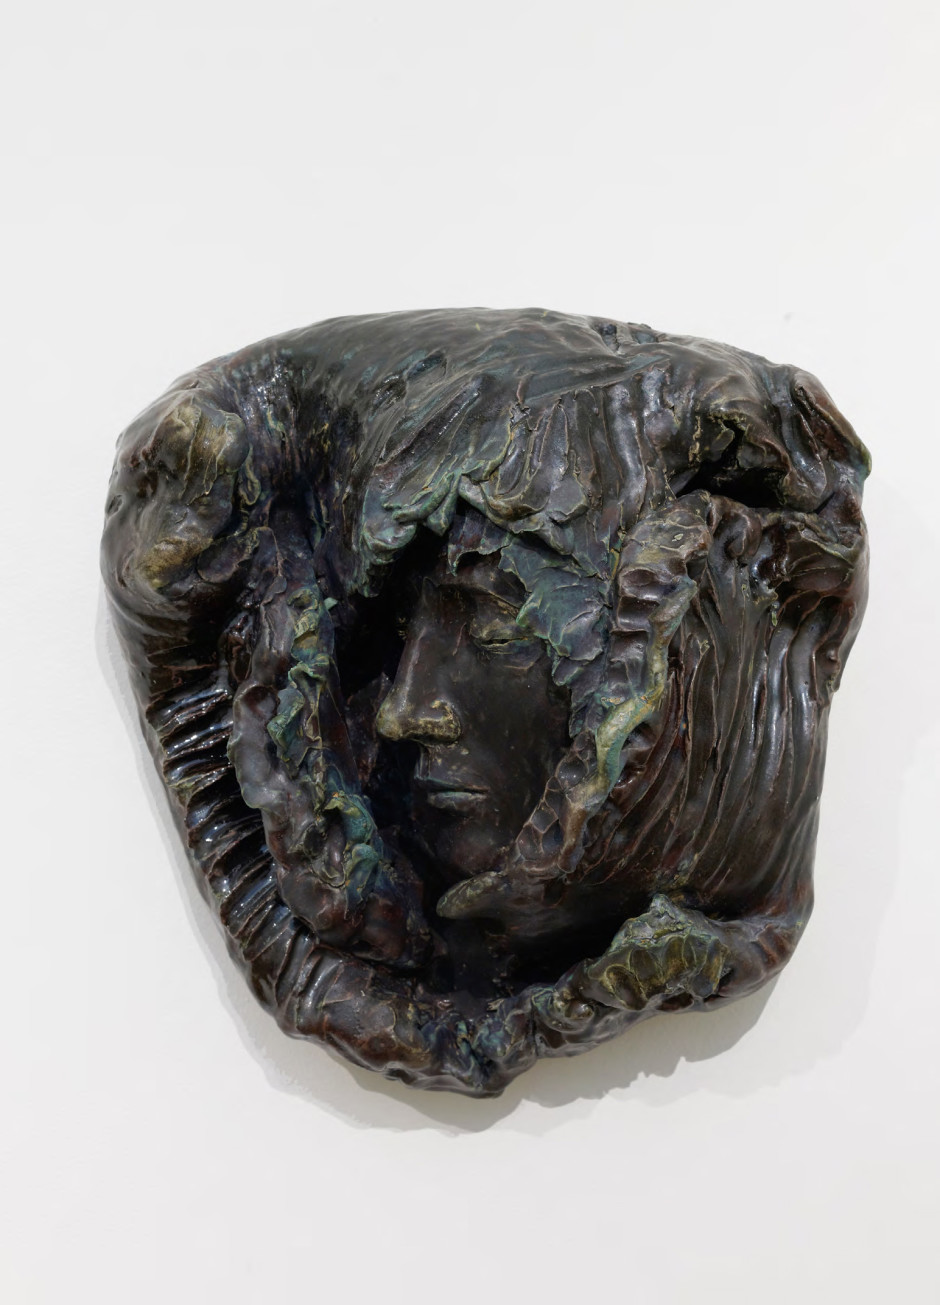 Face in a leaf, 2011  signed and dated on verso  glazed ceramic  40.5 x 39.0 x 20.5 cm 16 x 15 3/8 x 8 1/8 in.